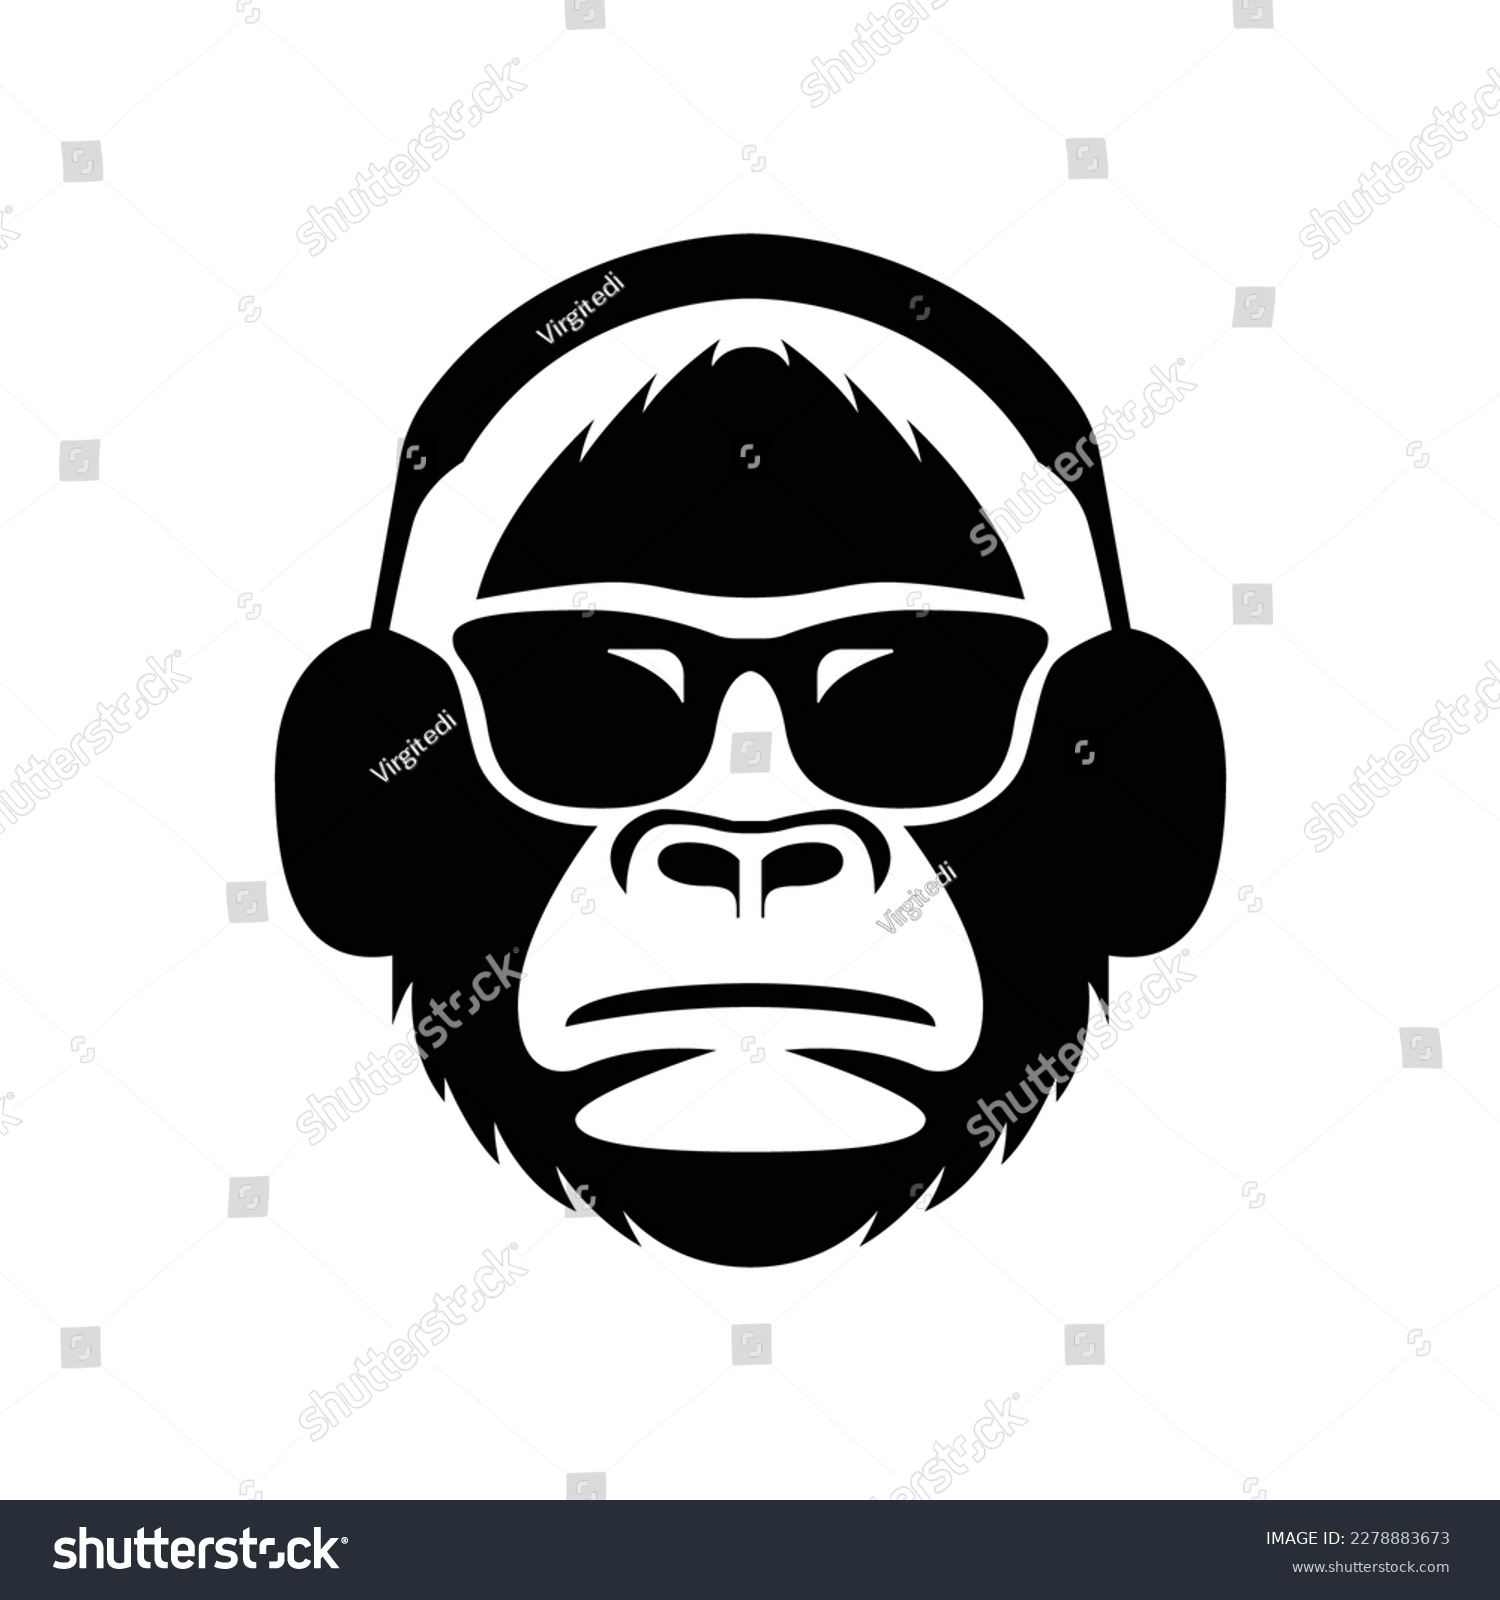 SVG of Monkey face silhouette with headphone svg